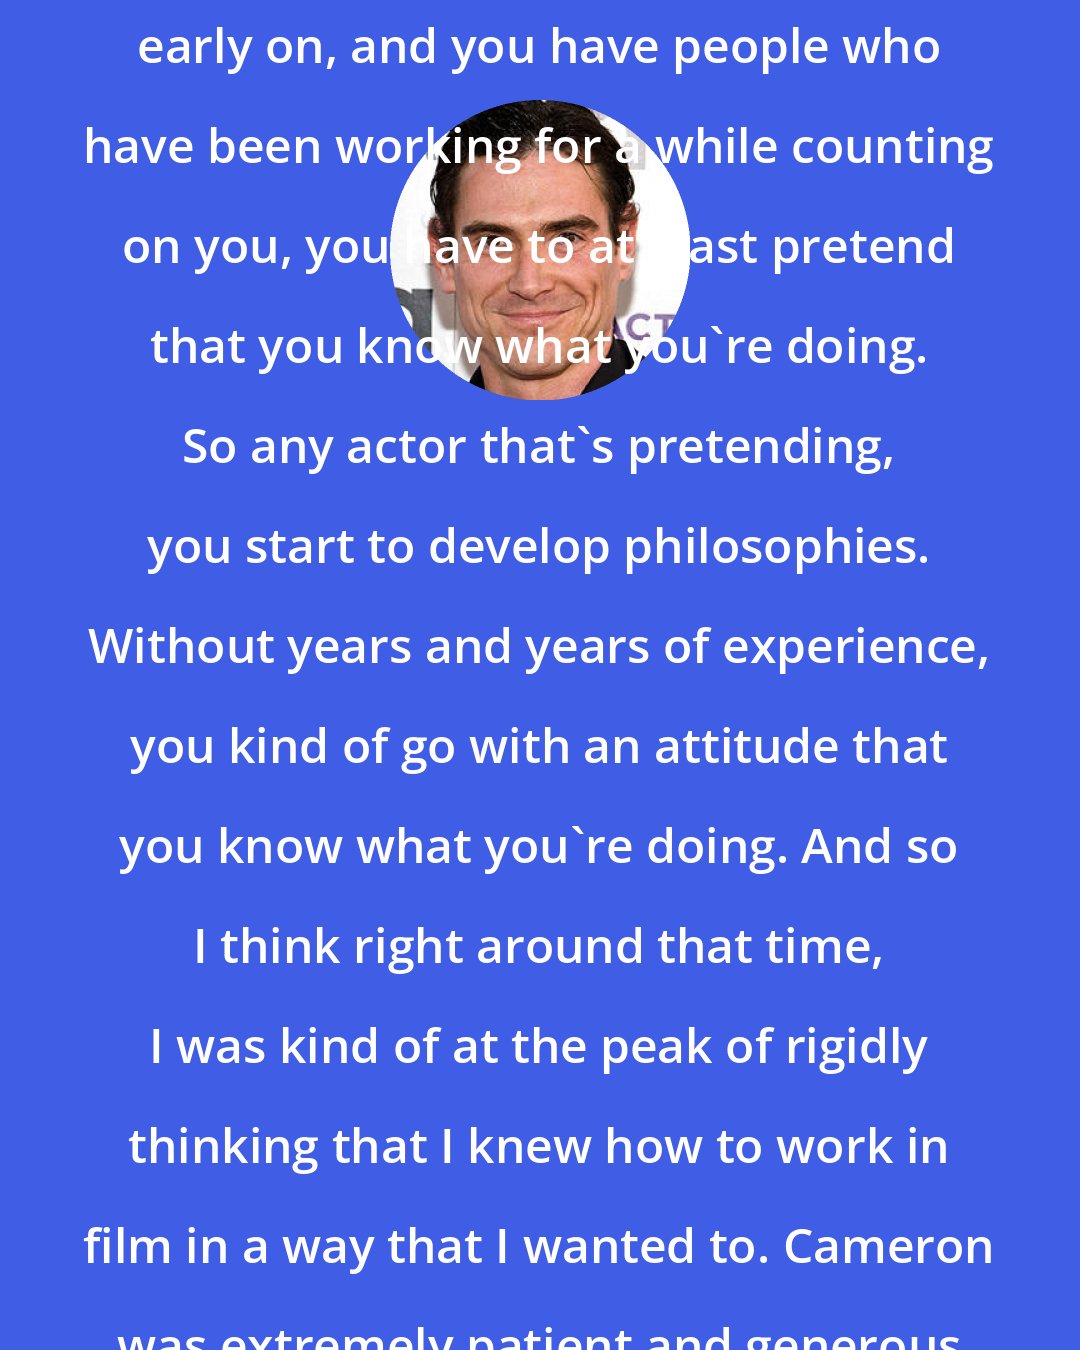 Billy Crudup: When you get many opportunities early on, and you have people who have been working for a while counting on you, you have to at least pretend that you know what you're doing. So any actor that's pretending, you start to develop philosophies. Without years and years of experience, you kind of go with an attitude that you know what you're doing. And so I think right around that time, I was kind of at the peak of rigidly thinking that I knew how to work in film in a way that I wanted to. Cameron was extremely patient and generous with me.